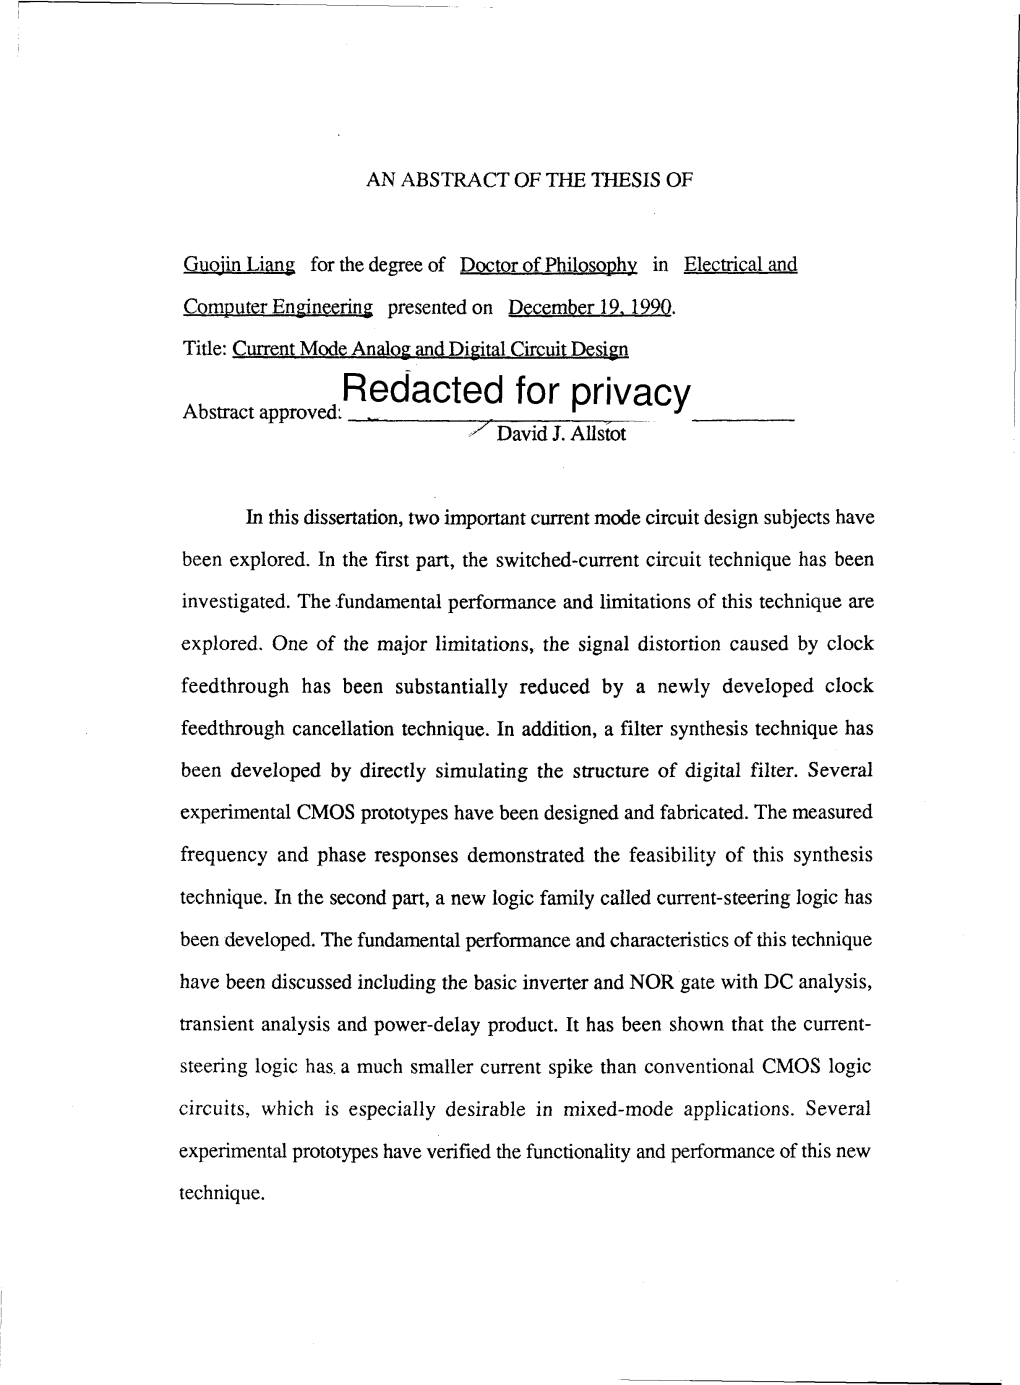 Current Mode Analog and Digital Circuit Design Redacted for Privacy Abstract Approved: David J